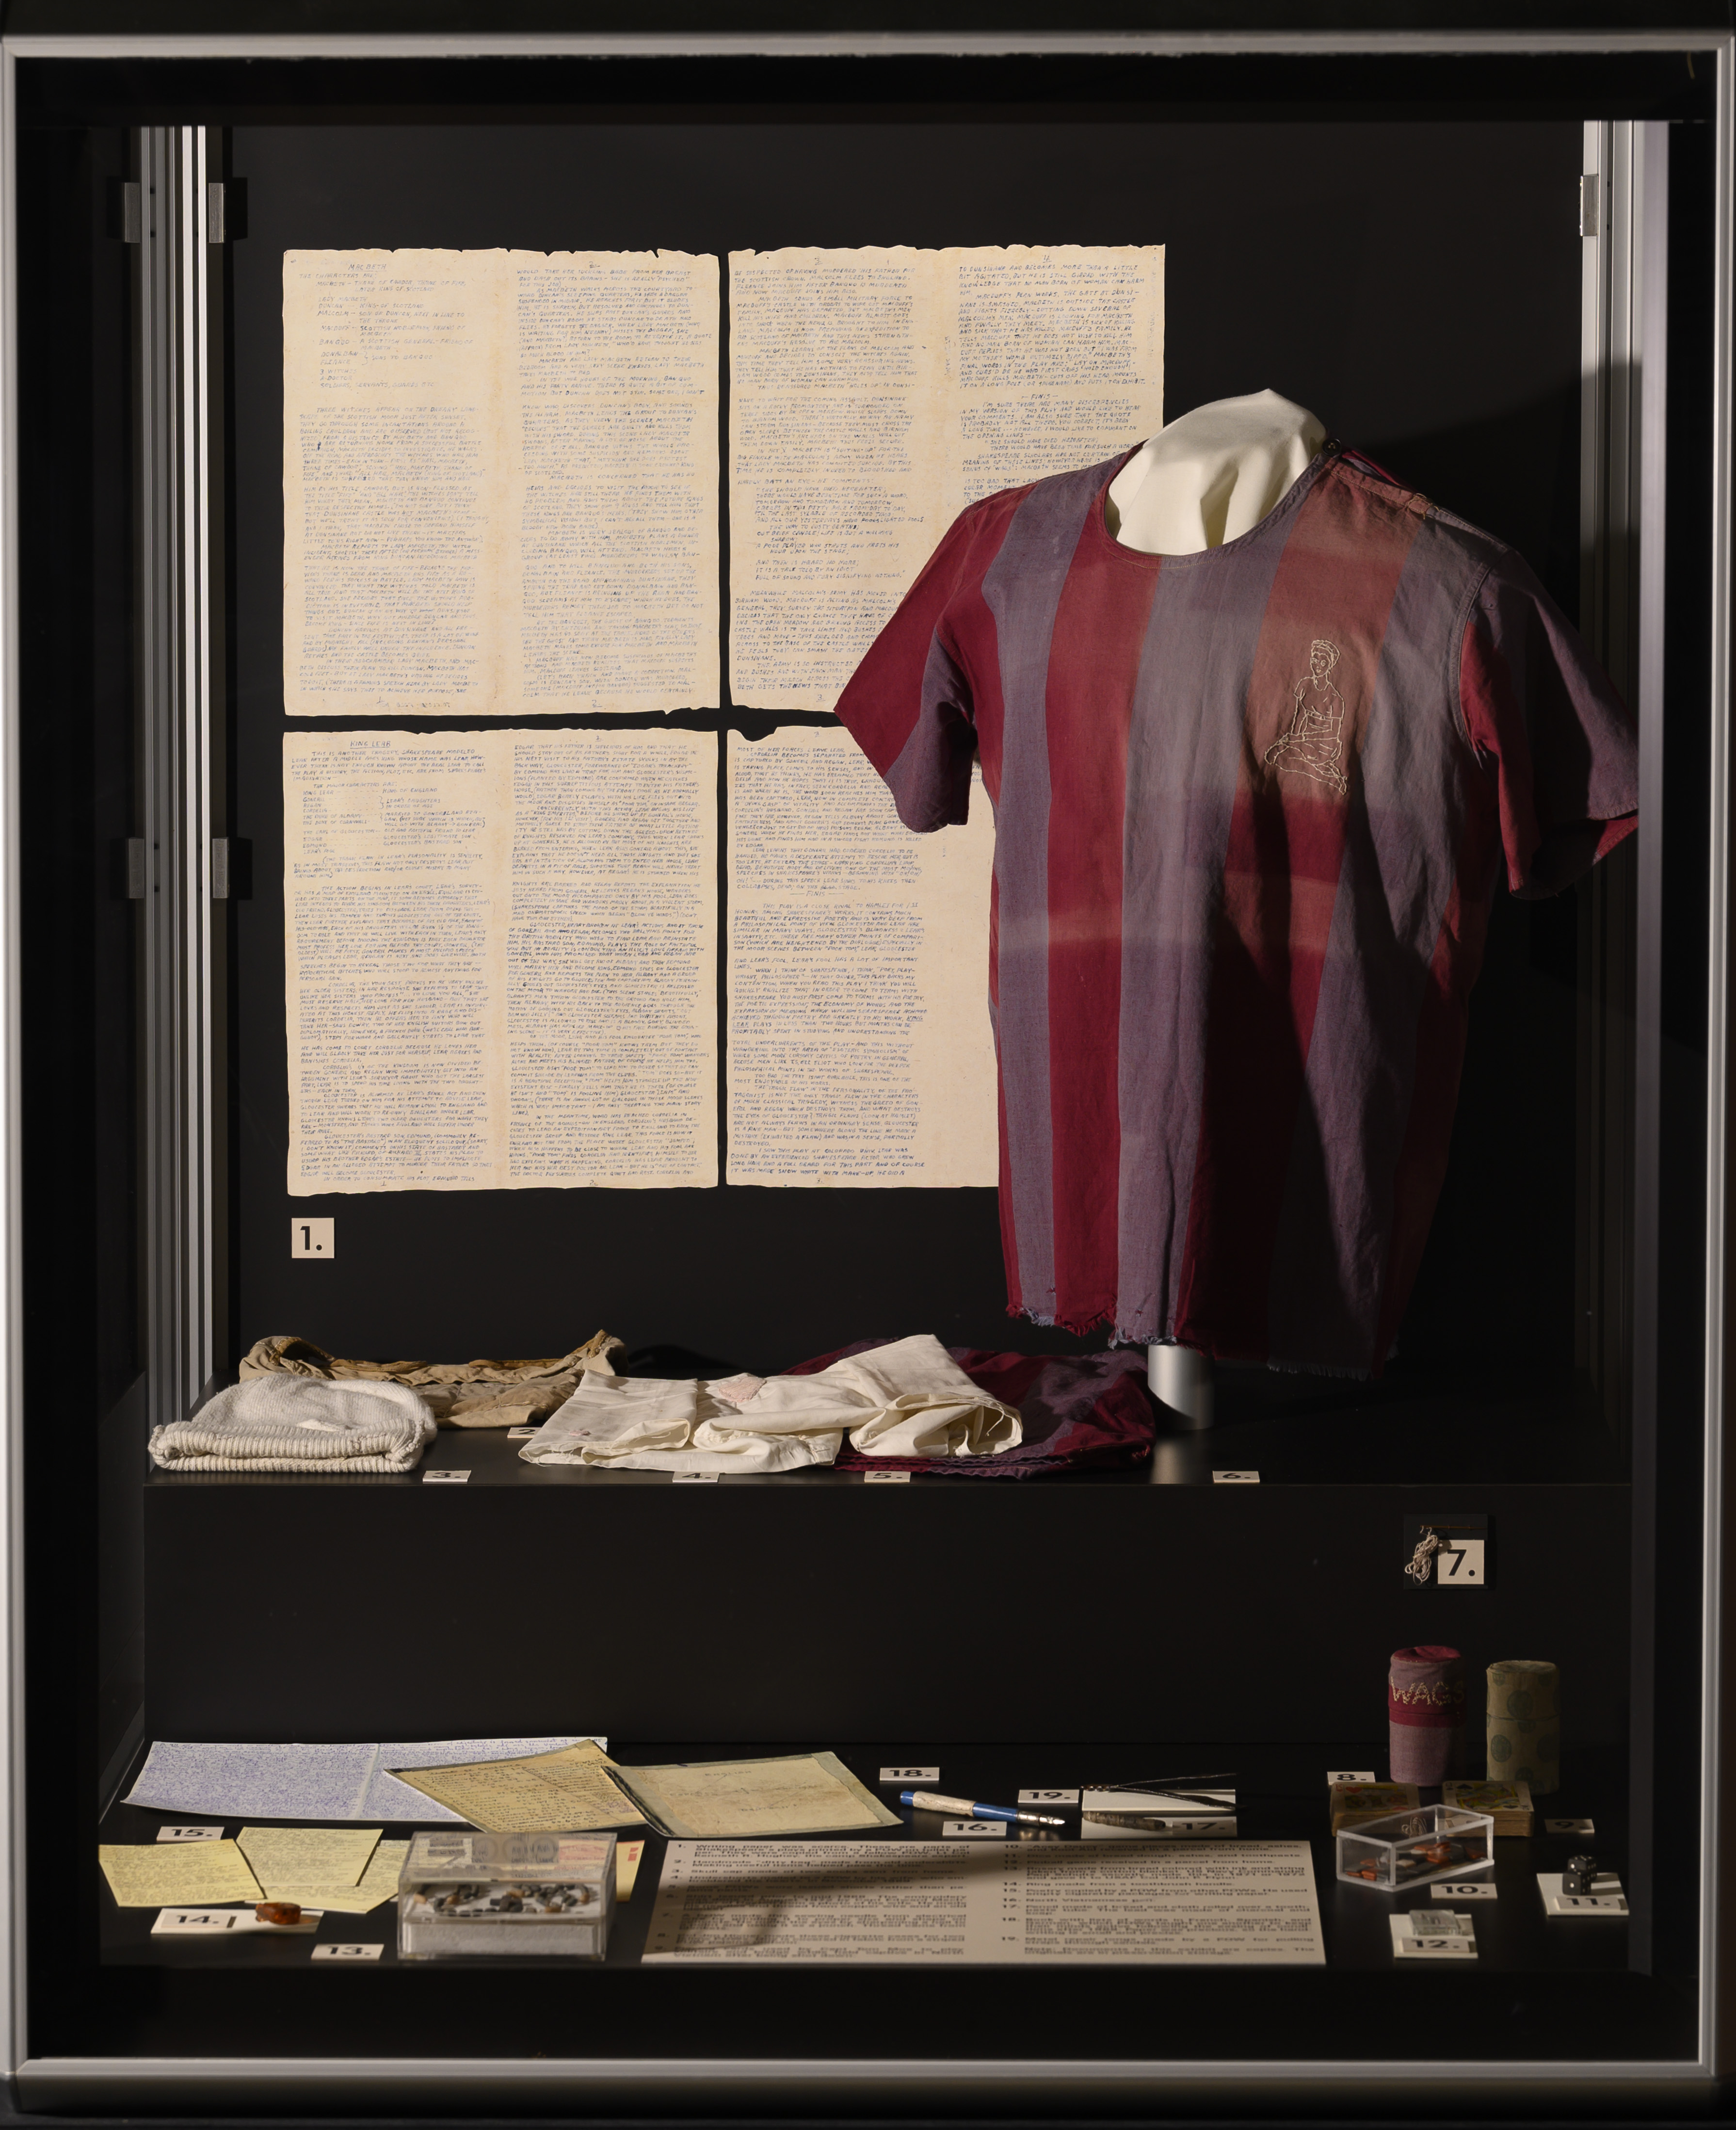 a full picture of the exhibit case containing the sewing needle and thread, as well as other pow artifacts